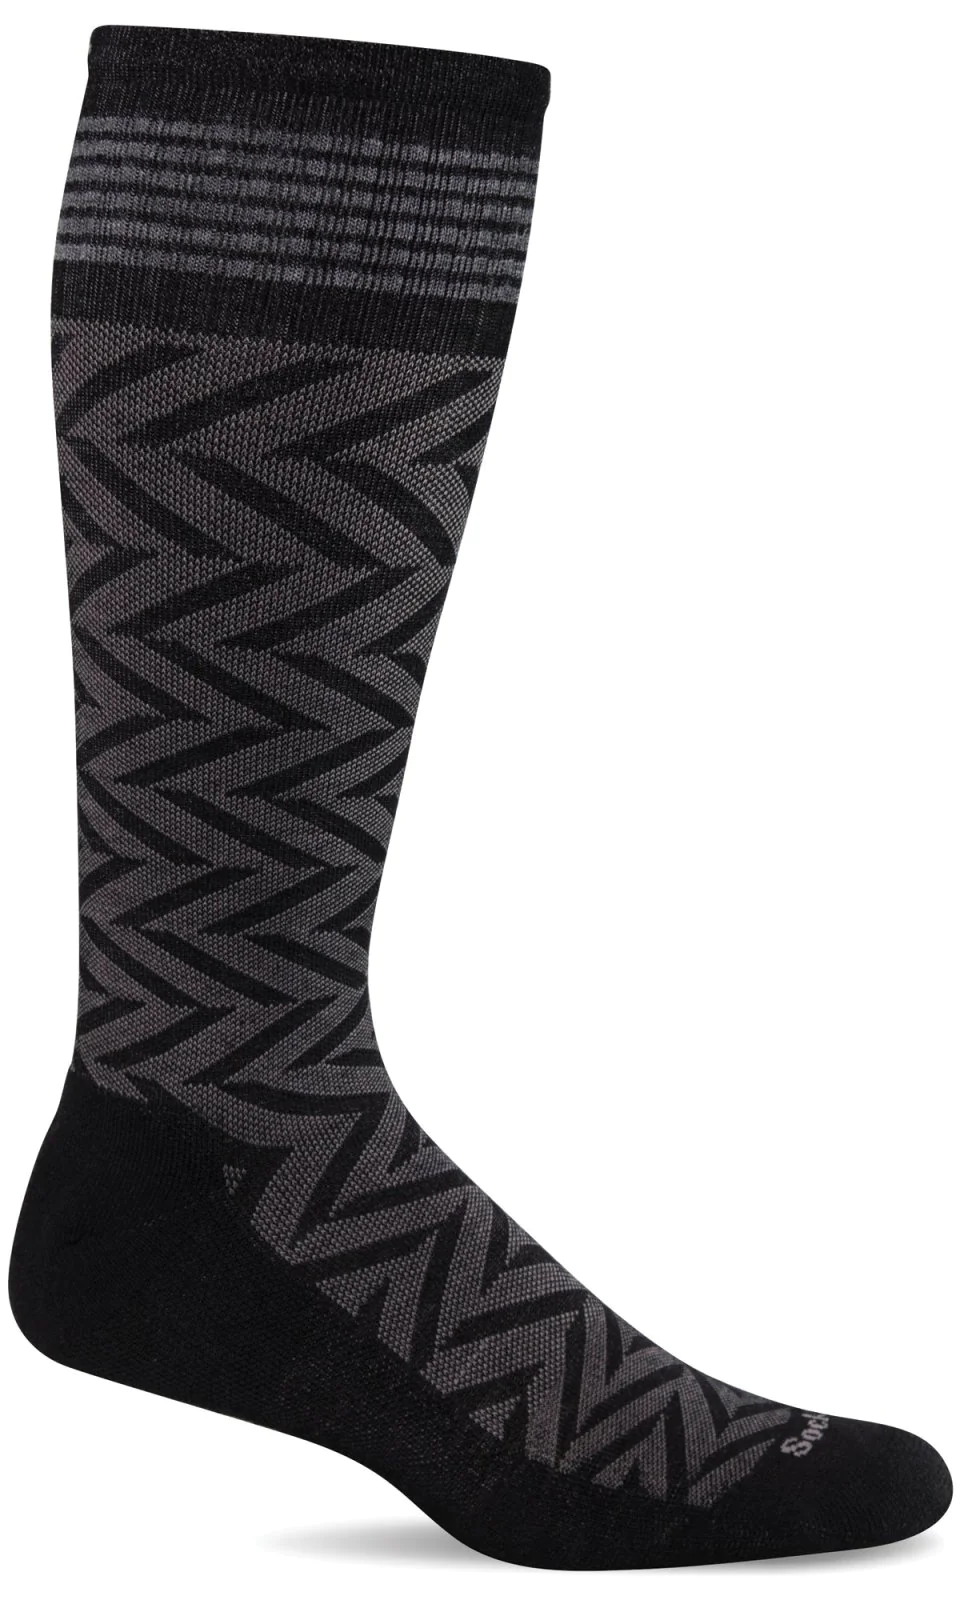 A pair of black men's bamboo compression socks with a zig-zag pattern from Sockwell